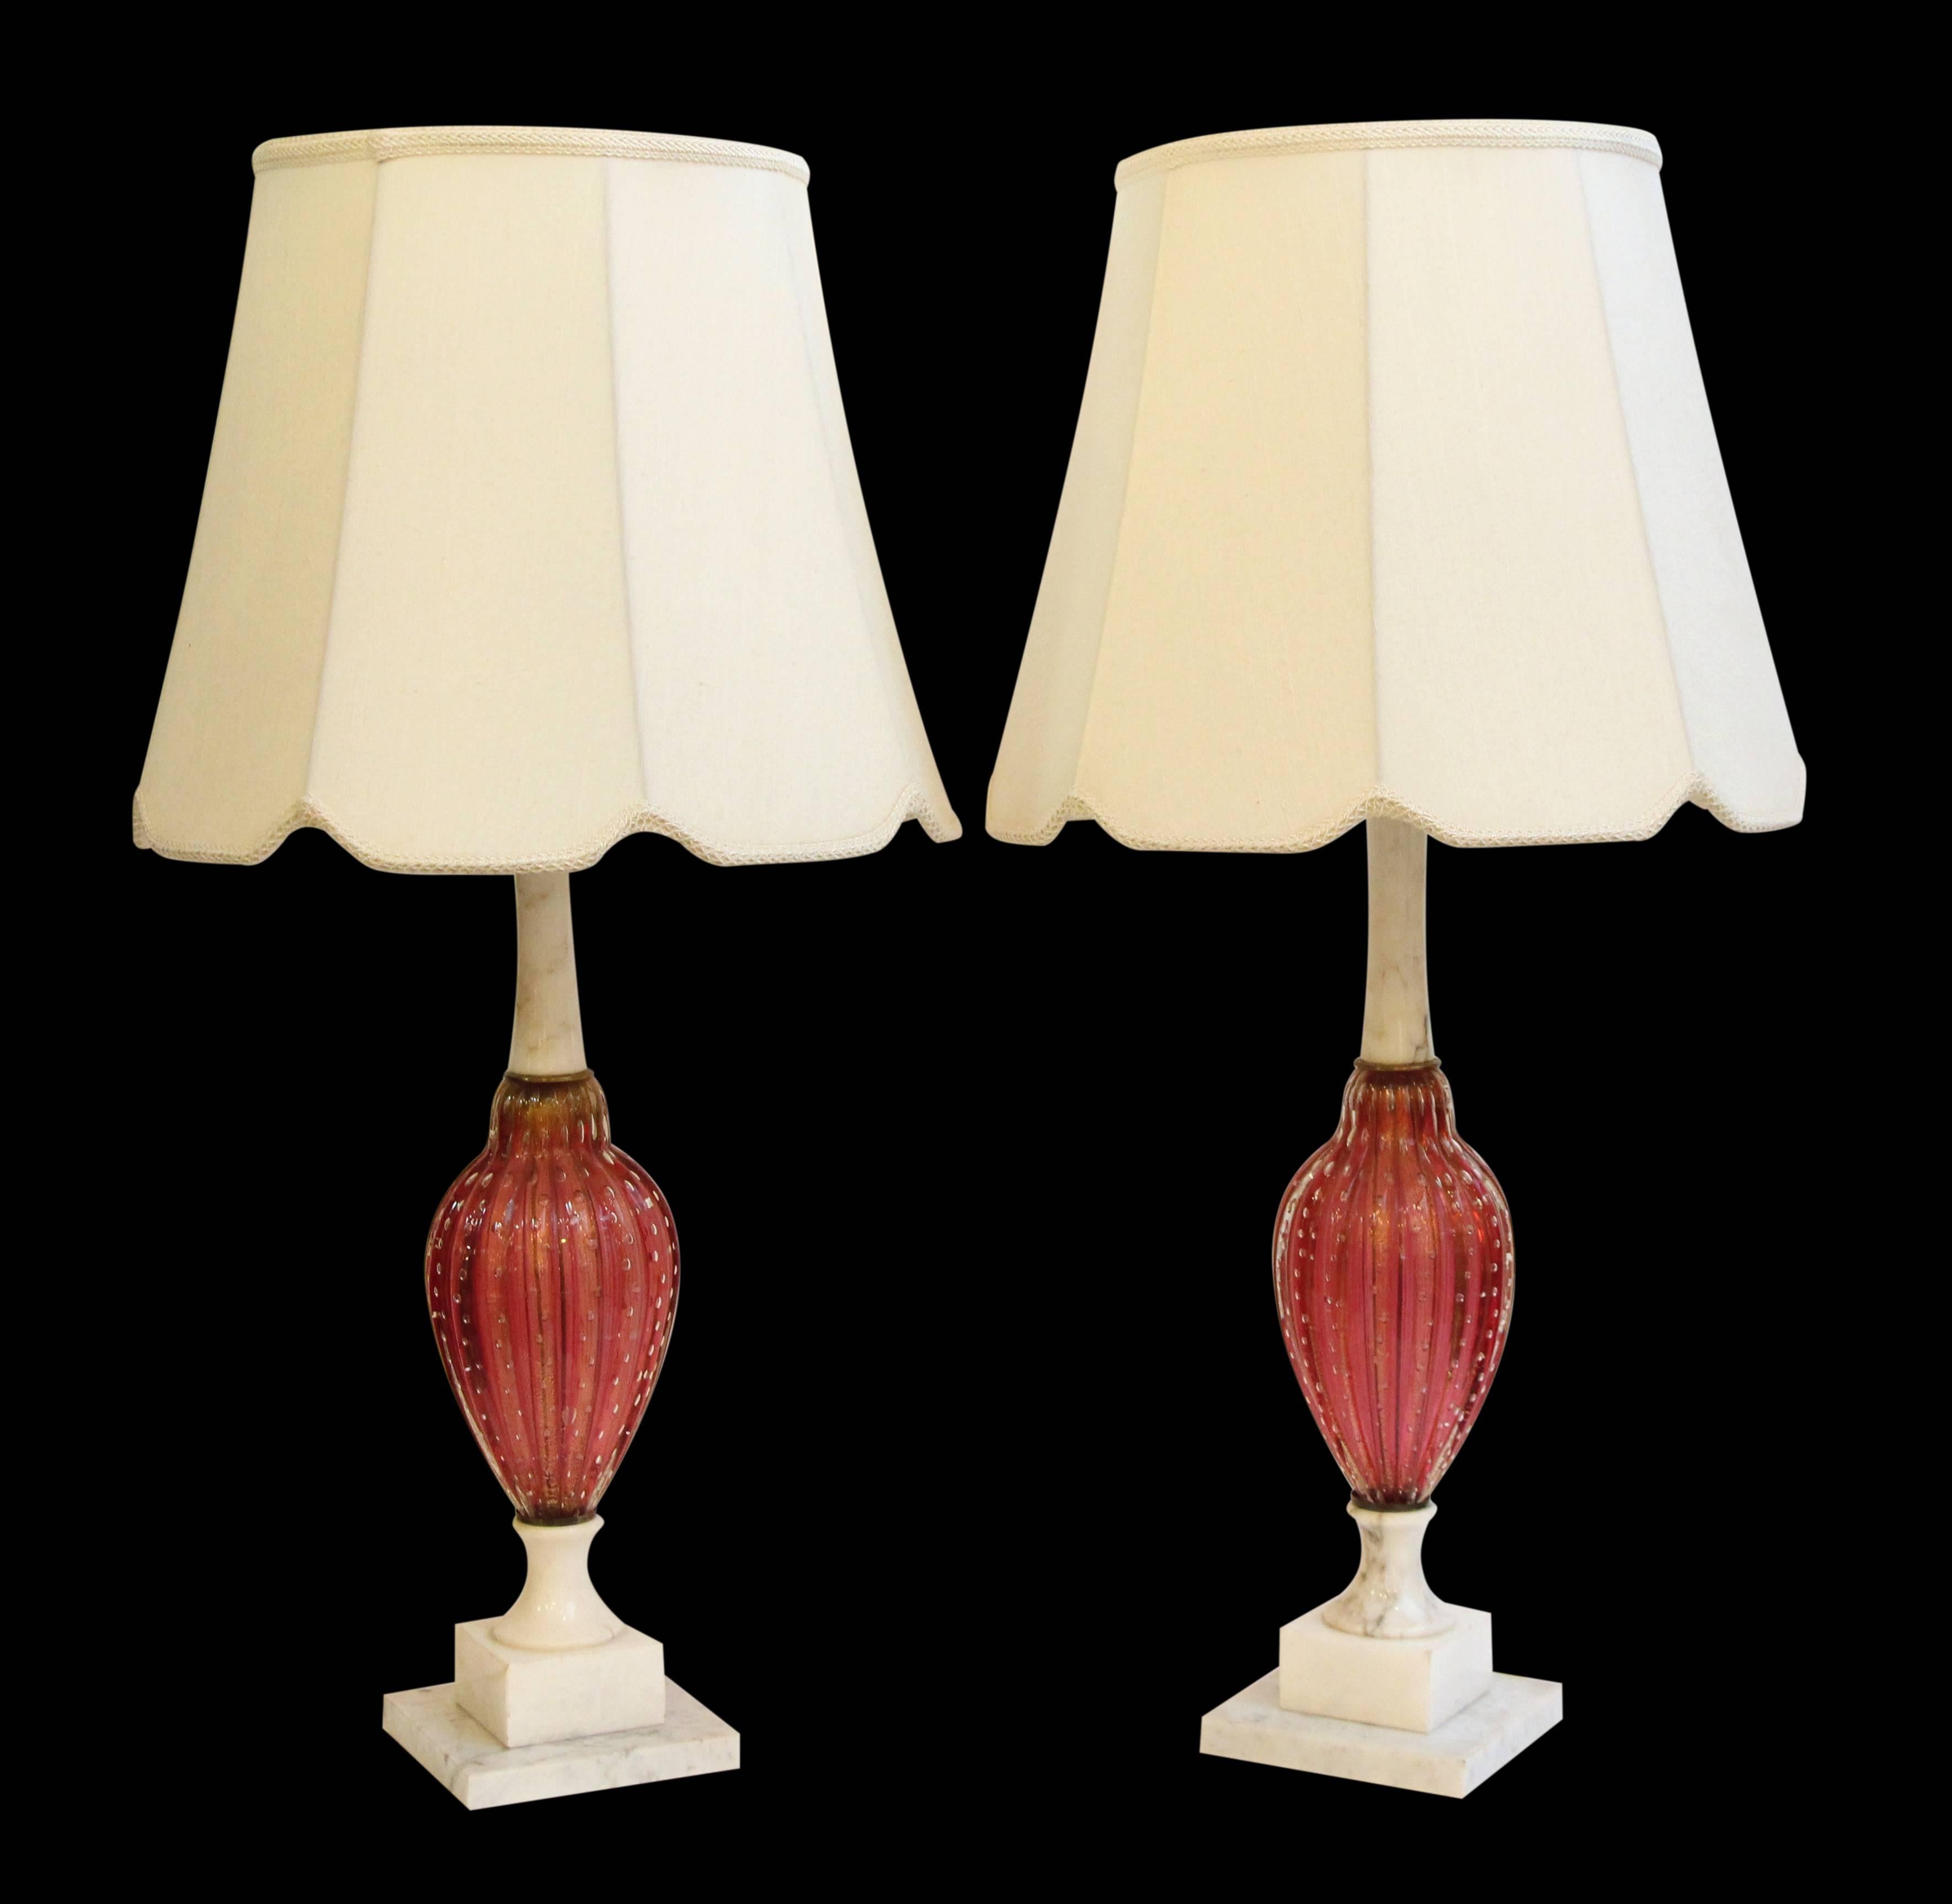 Pair of table lamps fashioned from pink Murano glass and alabaster mounts, circa 1940. This item can be viewed at our 5 East 16th St, Union Square location in Manhattan.